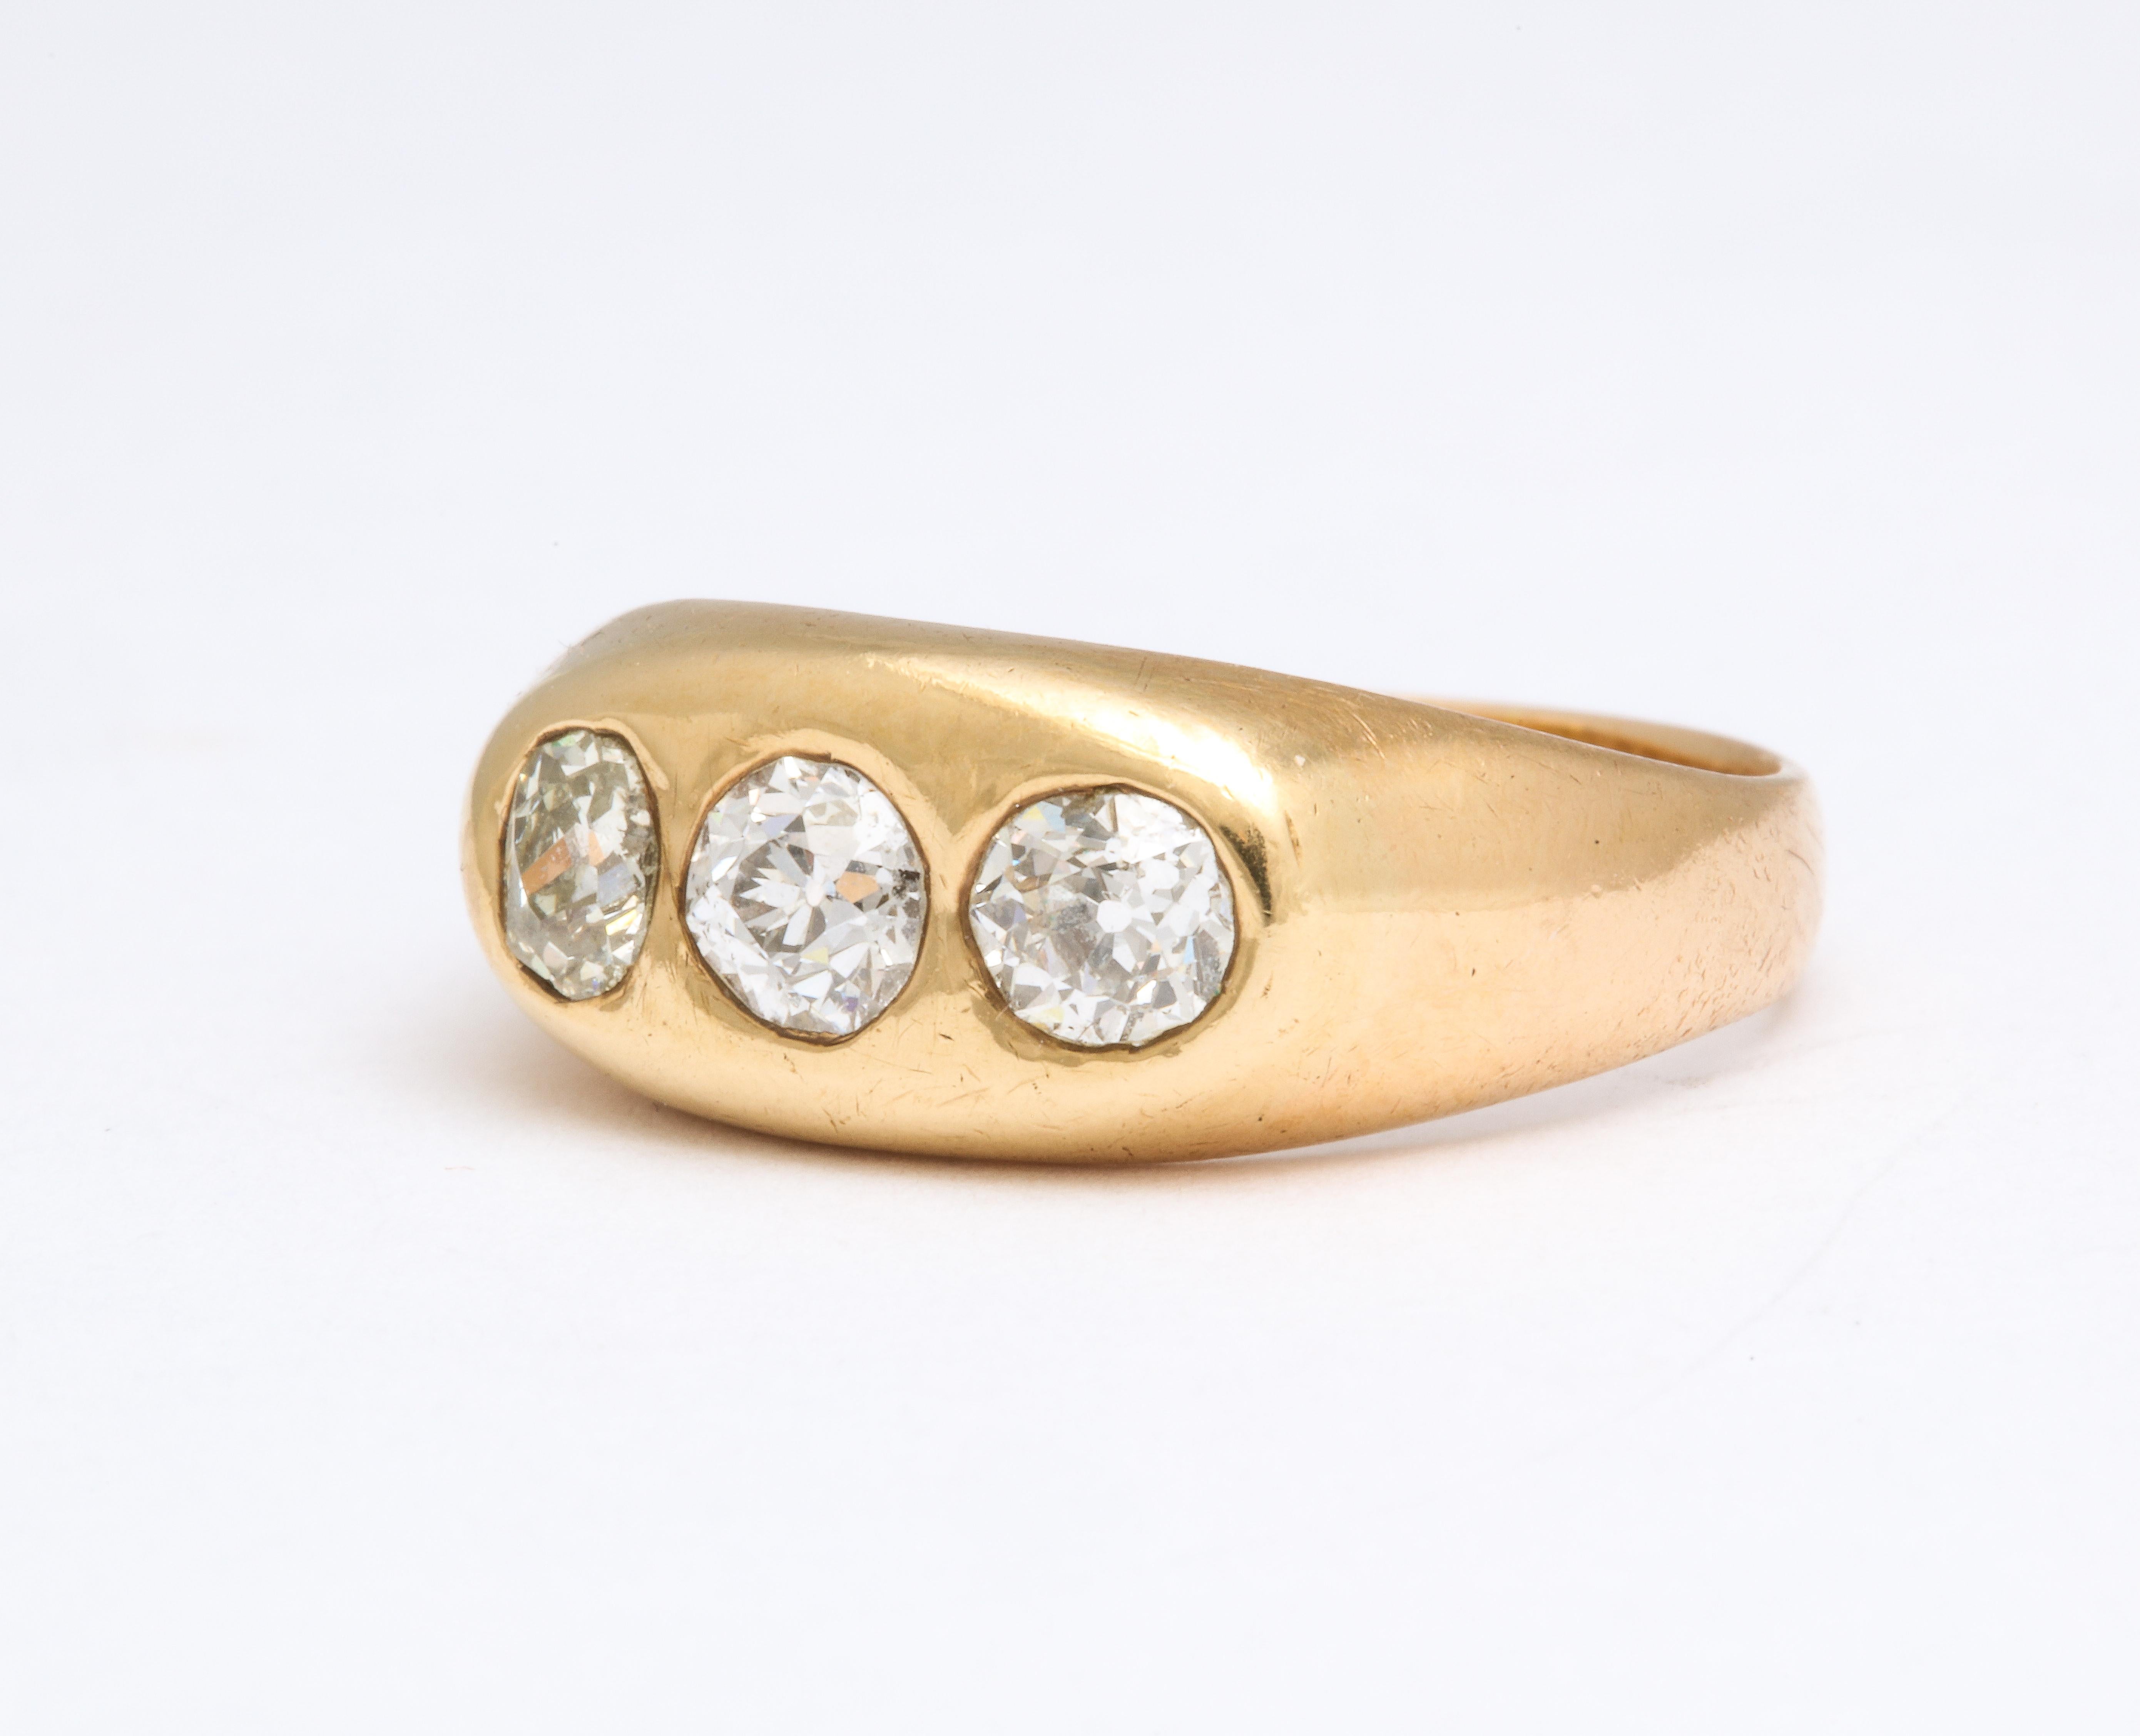 A classic three stone diamond Gypsy Ring with mine cut diamonds in a slightly tapered 14K mounting.
This classic ring can be stacked or worn on its own.